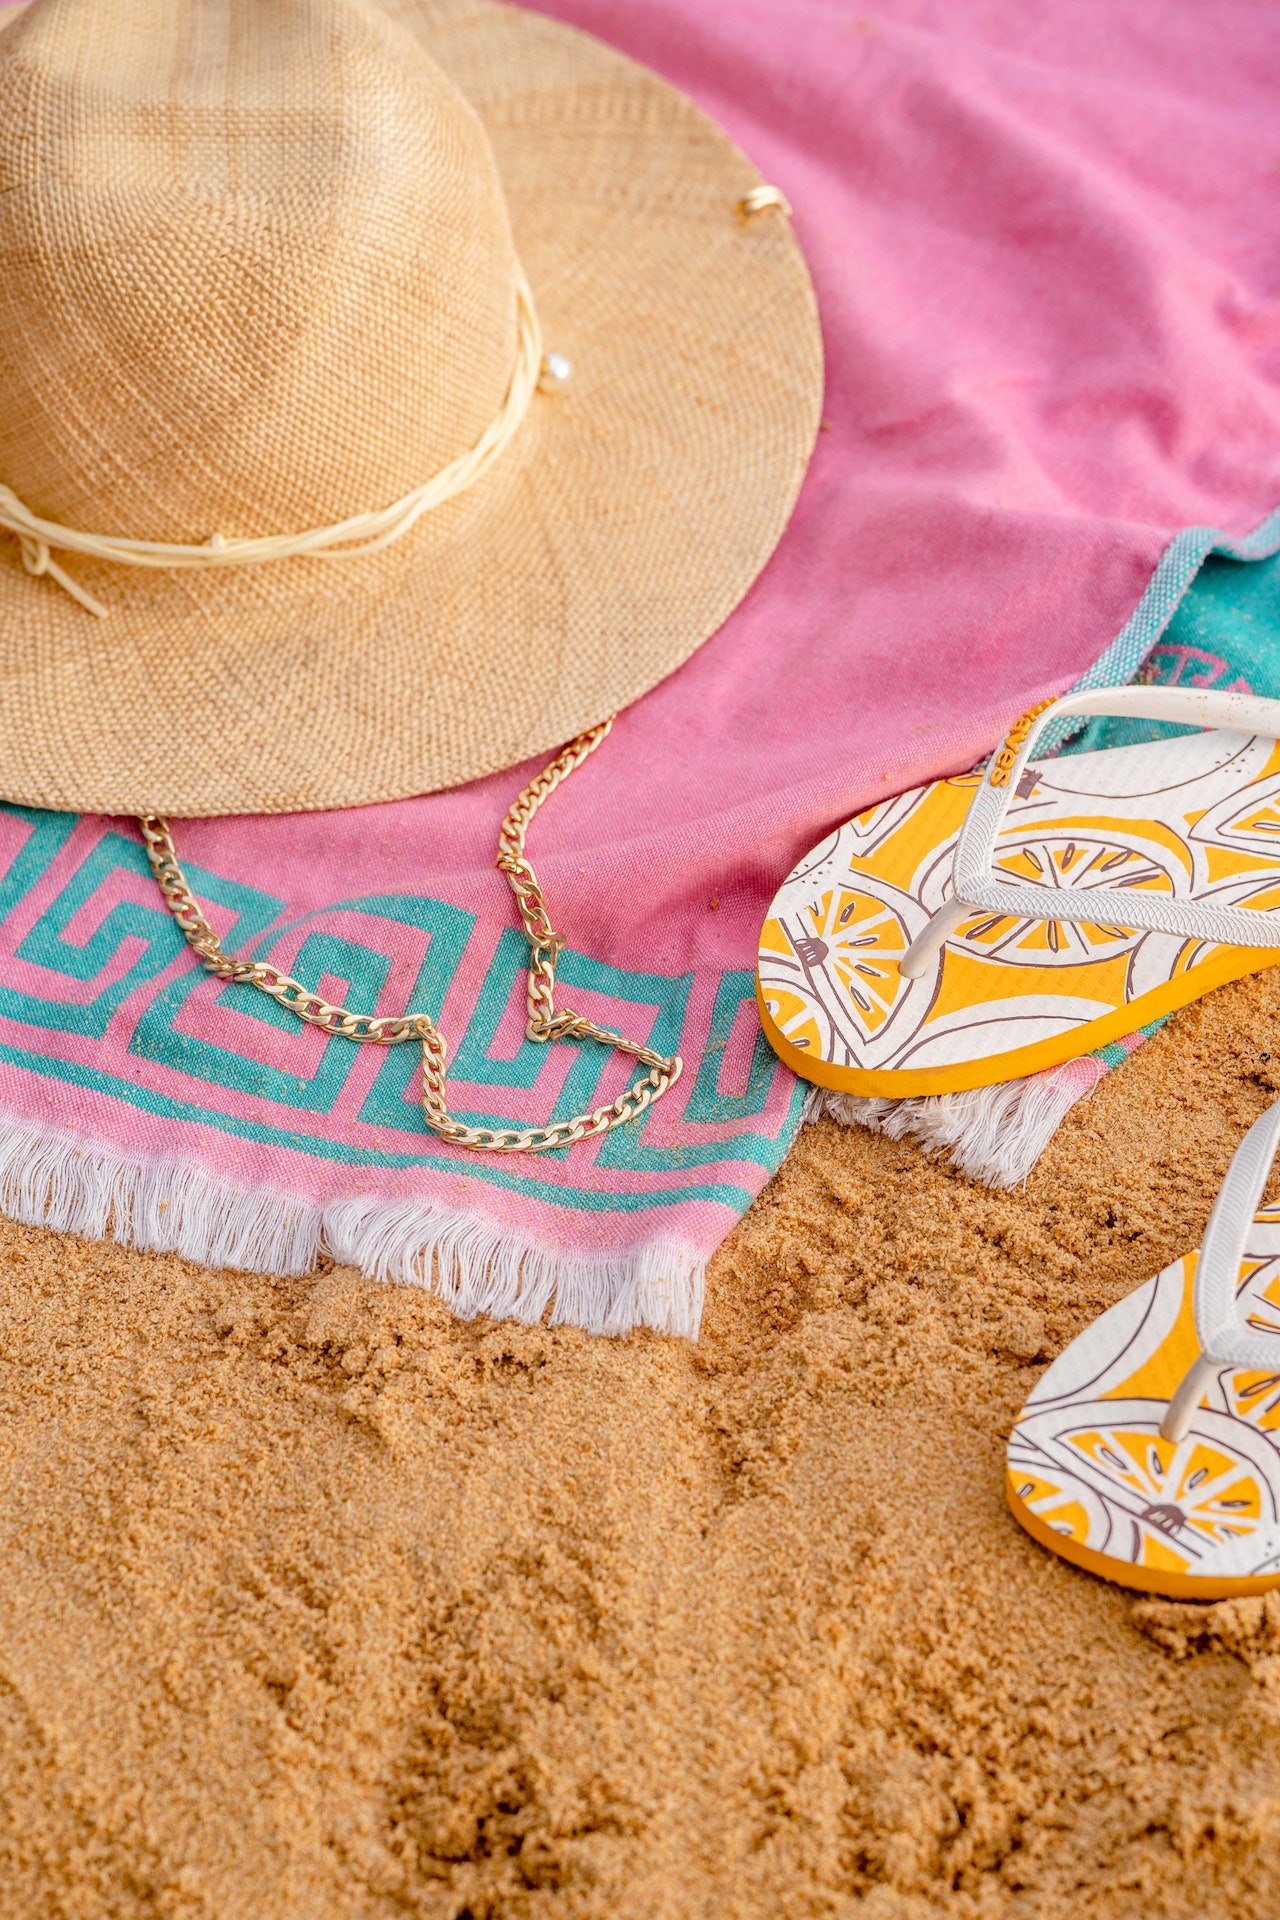 The Ultimate Beach Vacation Packing List: Top 5 Beach Bag Essentials You Can't Forget